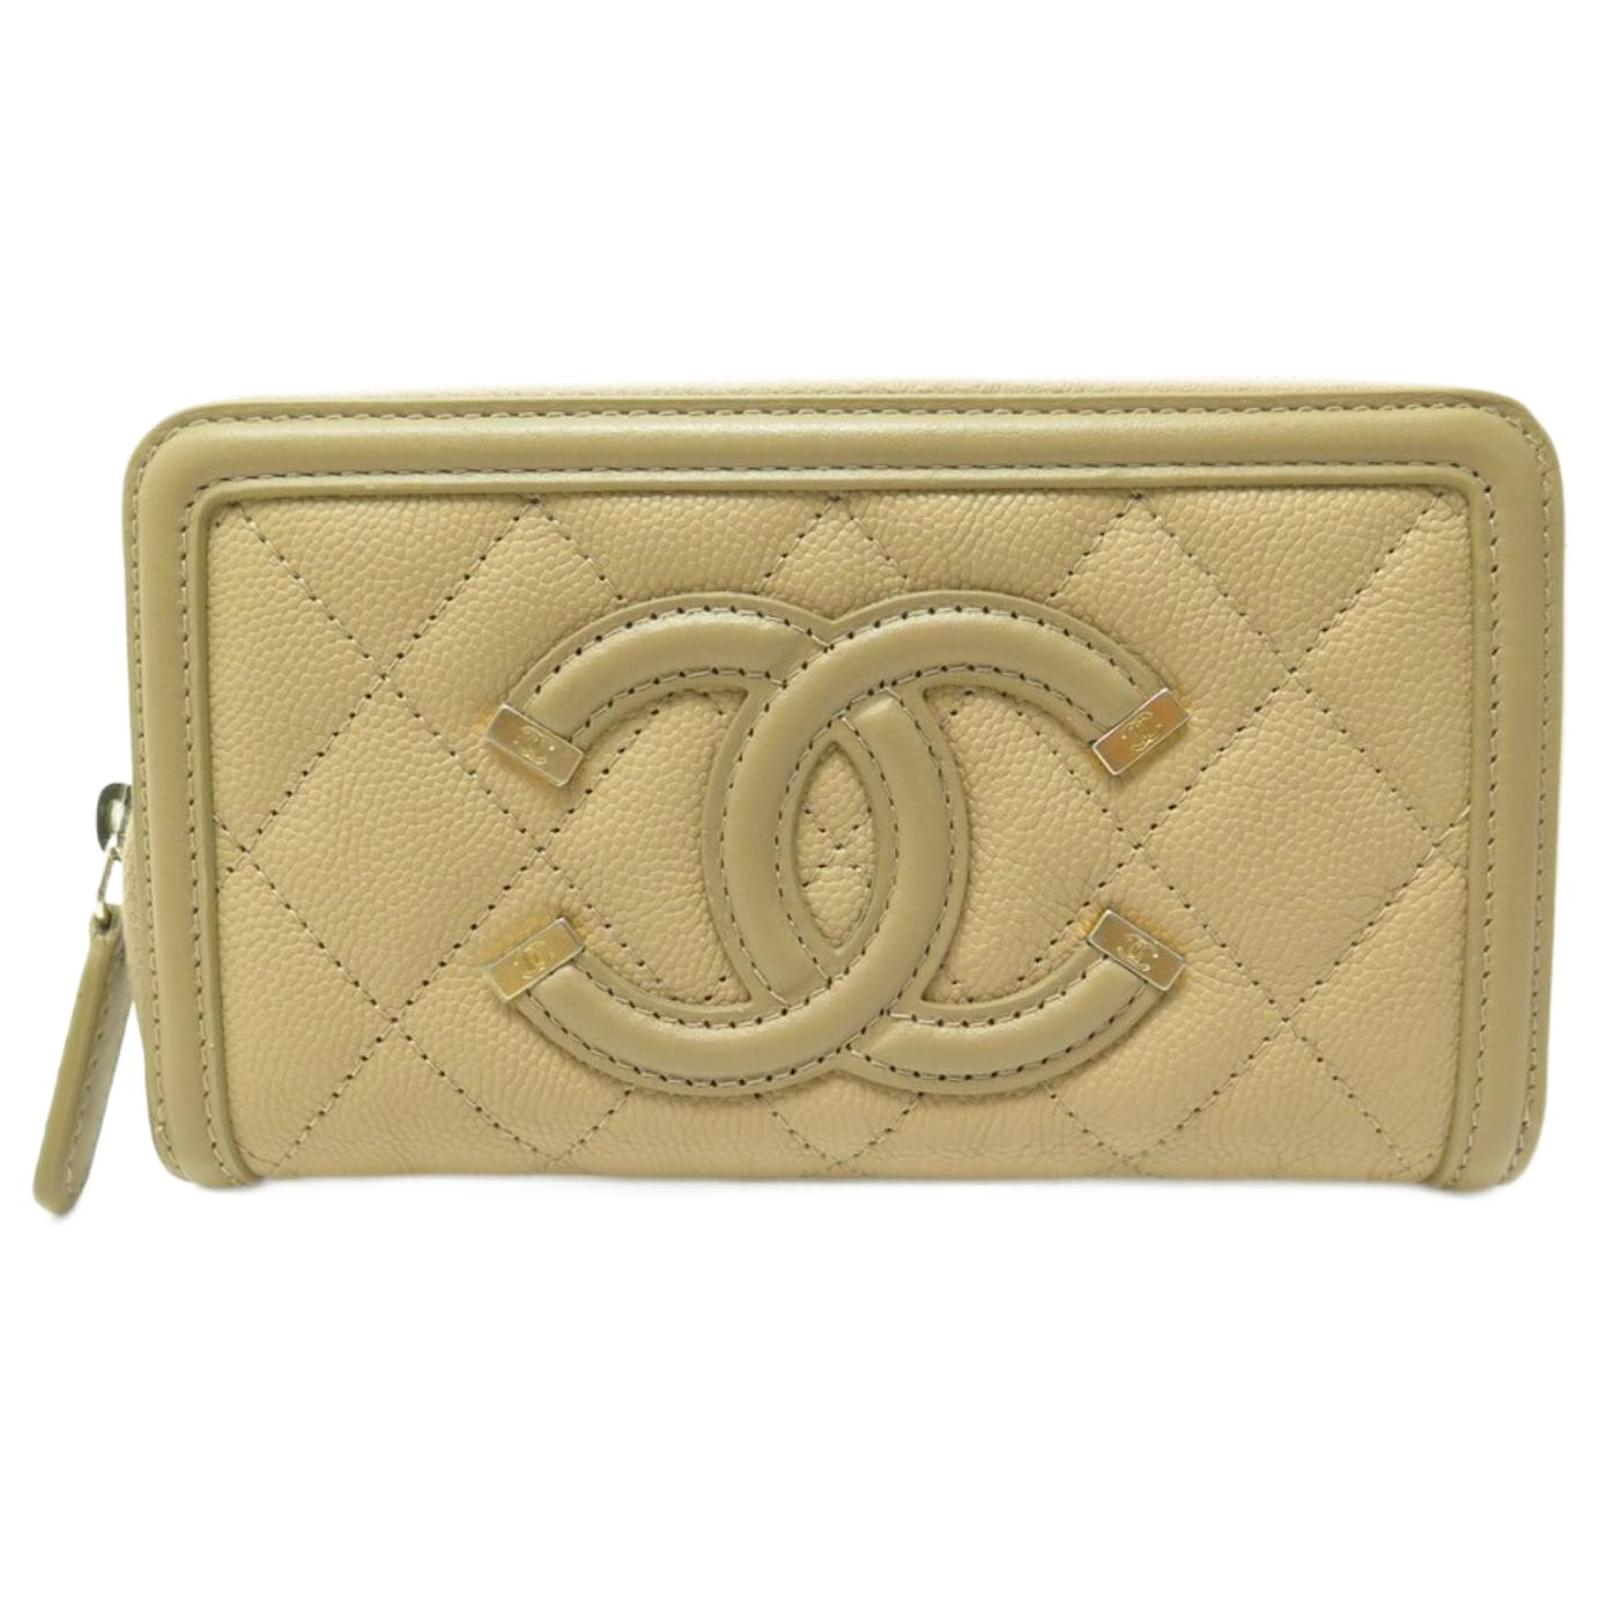 NEW CHANEL LONG WALLET WITH FILIGREE CC LOGO IN CAVIAR QUILTED LEATHER ...